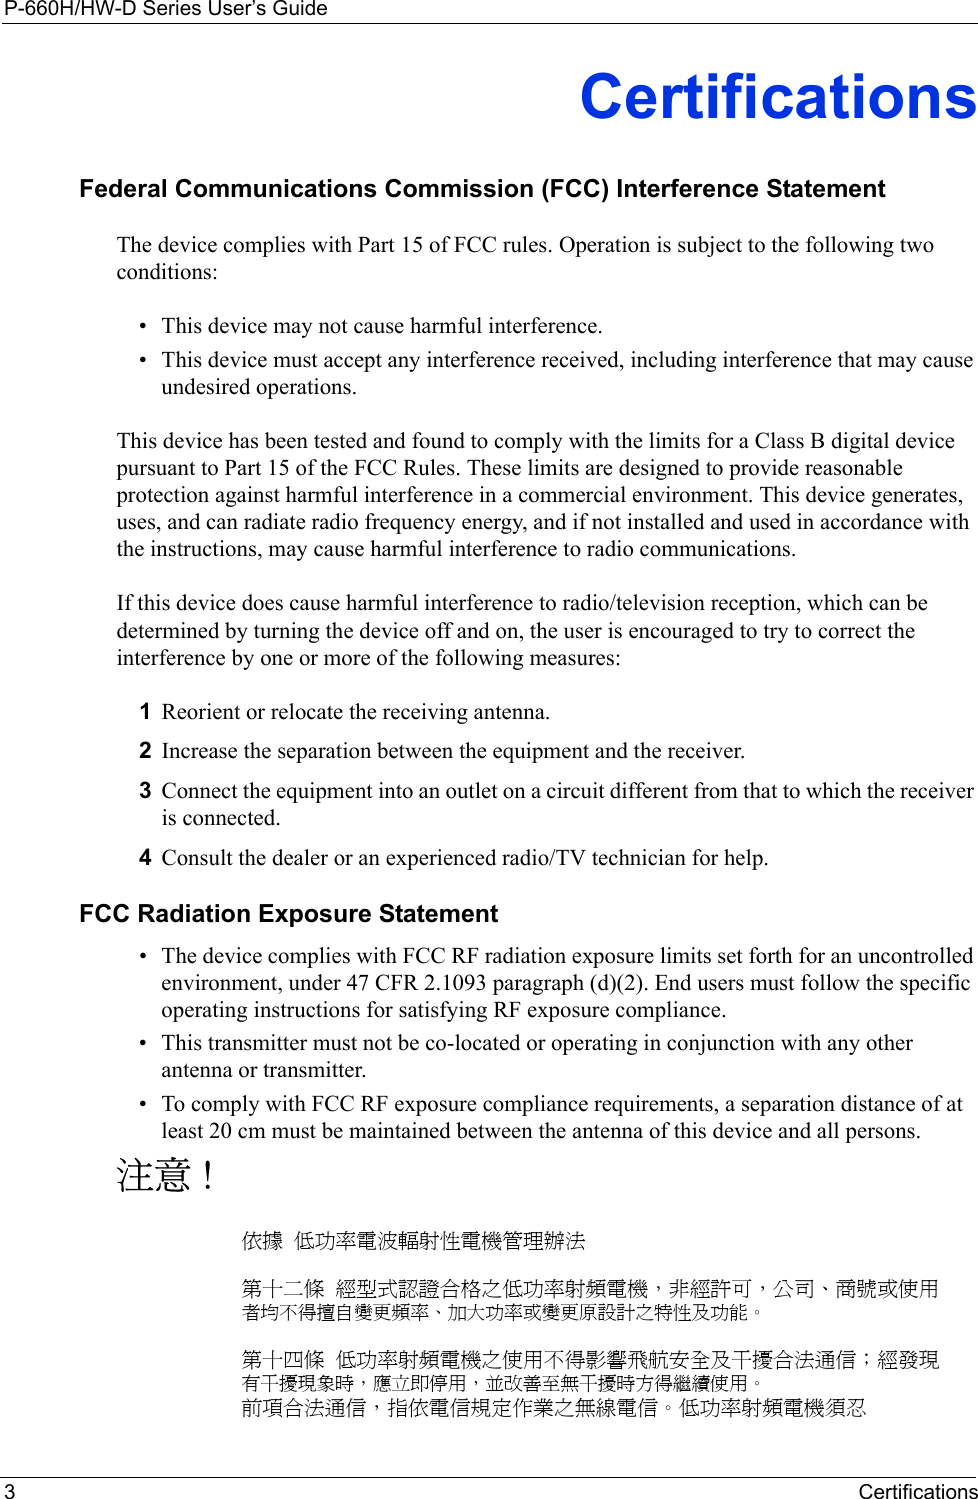 P-660H/HW-D Series User’s Guide3CertificationsCertificationsFederal Communications Commission (FCC) Interference StatementThe device complies with Part 15 of FCC rules. Operation is subject to the following two conditions:• This device may not cause harmful interference.• This device must accept any interference received, including interference that may cause undesired operations.This device has been tested and found to comply with the limits for a Class B digital device pursuant to Part 15 of the FCC Rules. These limits are designed to provide reasonable protection against harmful interference in a commercial environment. This device generates, uses, and can radiate radio frequency energy, and if not installed and used in accordance with the instructions, may cause harmful interference to radio communications.If this device does cause harmful interference to radio/television reception, which can be determined by turning the device off and on, the user is encouraged to try to correct the interference by one or more of the following measures:1Reorient or relocate the receiving antenna.2Increase the separation between the equipment and the receiver.3Connect the equipment into an outlet on a circuit different from that to which the receiver is connected.4Consult the dealer or an experienced radio/TV technician for help.FCC Radiation Exposure Statement• The device complies with FCC RF radiation exposure limits set forth for an uncontrolled environment, under 47 CFR 2.1093 paragraph (d)(2). End users must follow the specific operating instructions for satisfying RF exposure compliance. • This transmitter must not be co-located or operating in conjunction with any other antenna or transmitter. • To comply with FCC RF exposure compliance requirements, a separation distance of at least 20 cm must be maintained between the antenna of this device and all persons. 注意 !依據  低功率電波輻射性電機管理辦法第十二條  經型式認證合格之低功率射頻電機，非經許可，公司、商號或使用者均不得擅自變更頻率、加大功率或變更原設計之特性及功能。第十四條  低功率射頻電機之使用不得影響飛航安全及干擾合法通信；經發現有干擾現象時，應立即停用，並改善至無干擾時方得繼續使用。前項合法通信，指依電信規定作業之無線電信。低功率射頻電機須忍